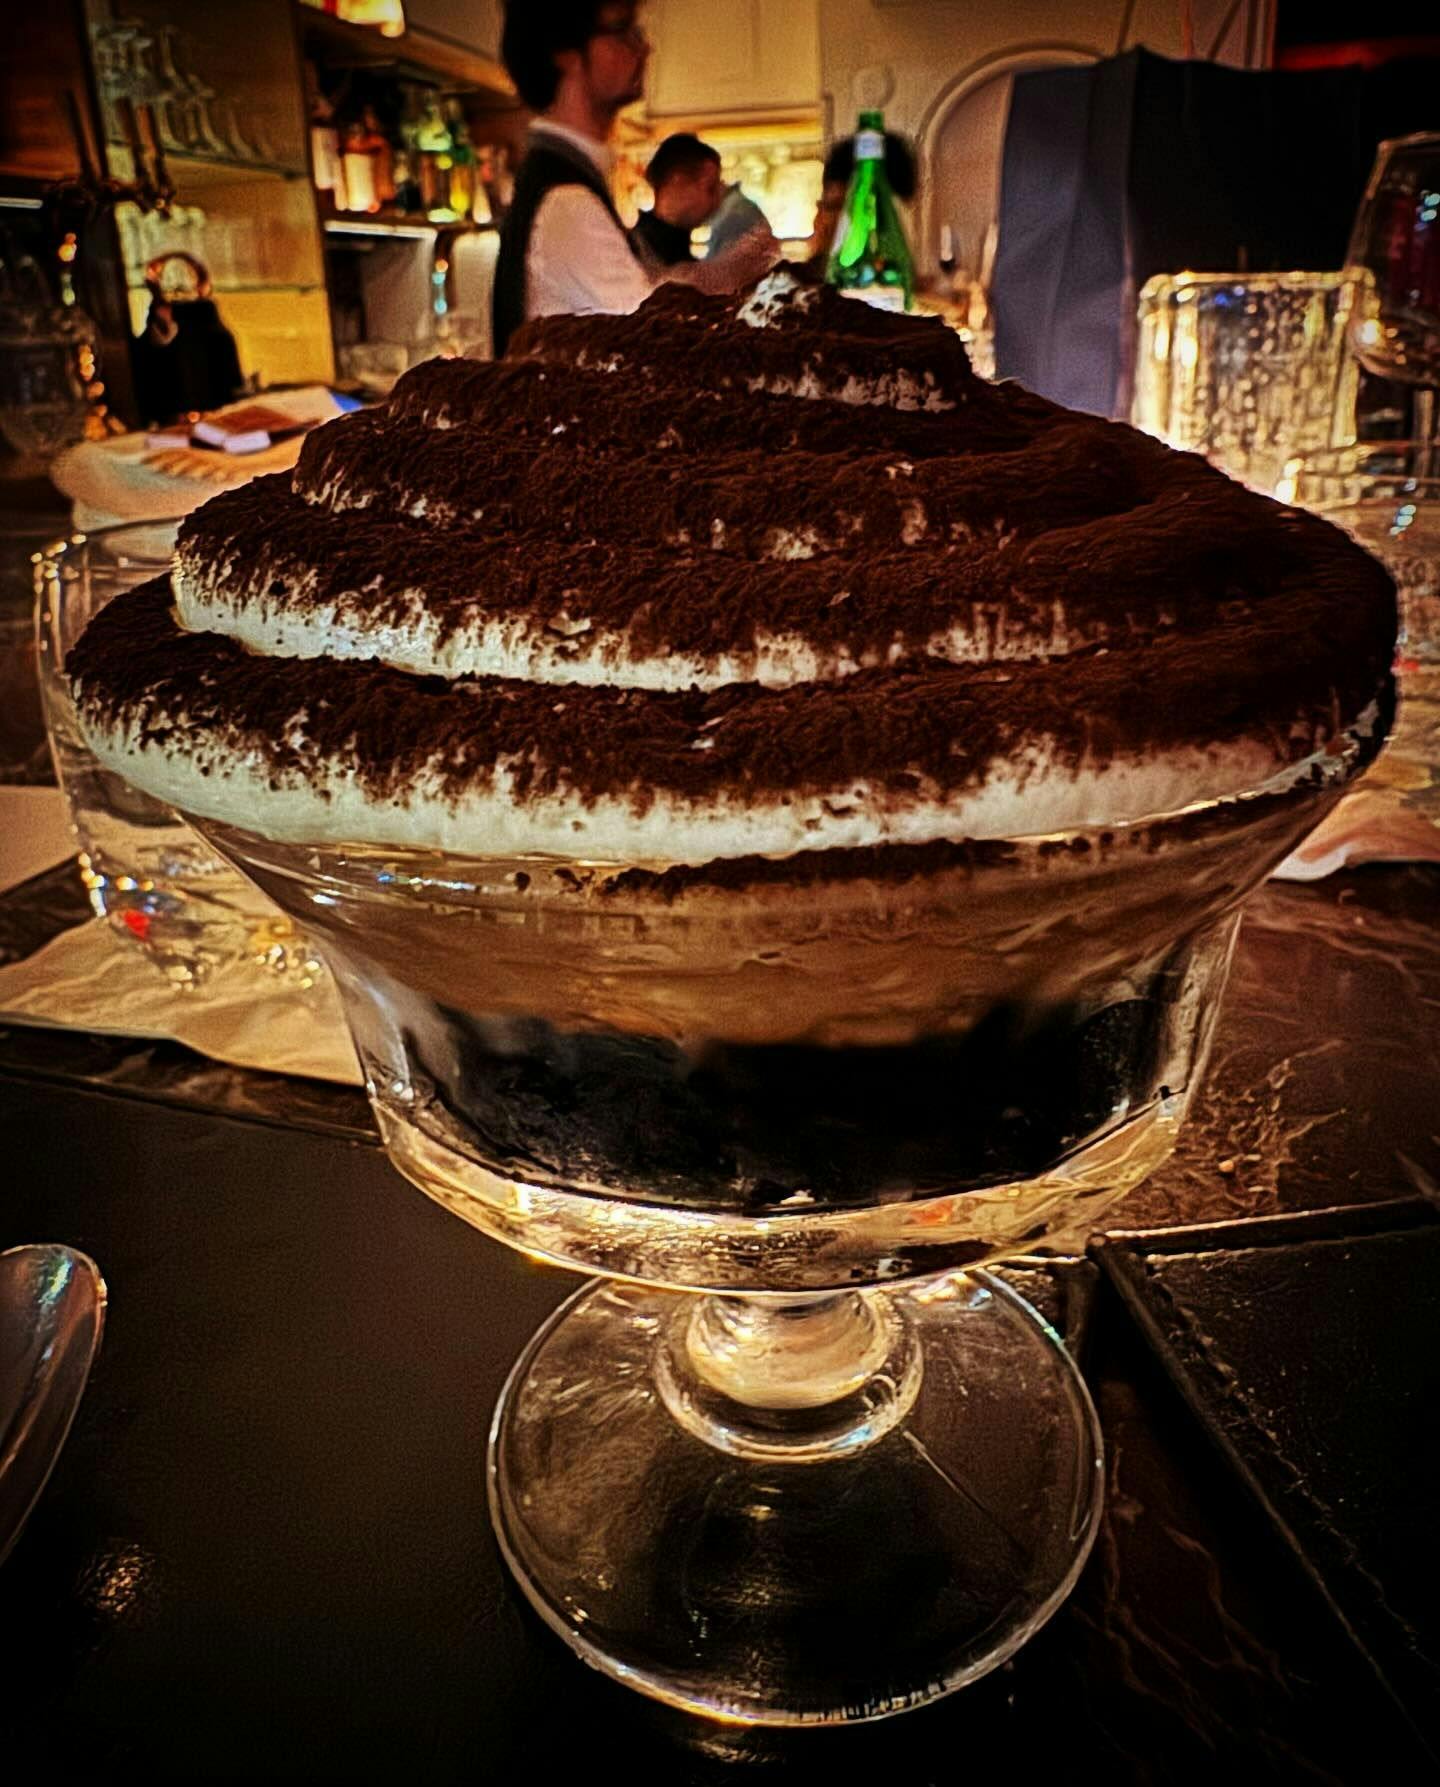 A decadent tiramisu with a generous dusting of cocoa powder, served in an elegant glass dessert bowl, symbolizing the fine desserts that can be enjoyed at the exquisite dining venues New York has to offer through Booked.